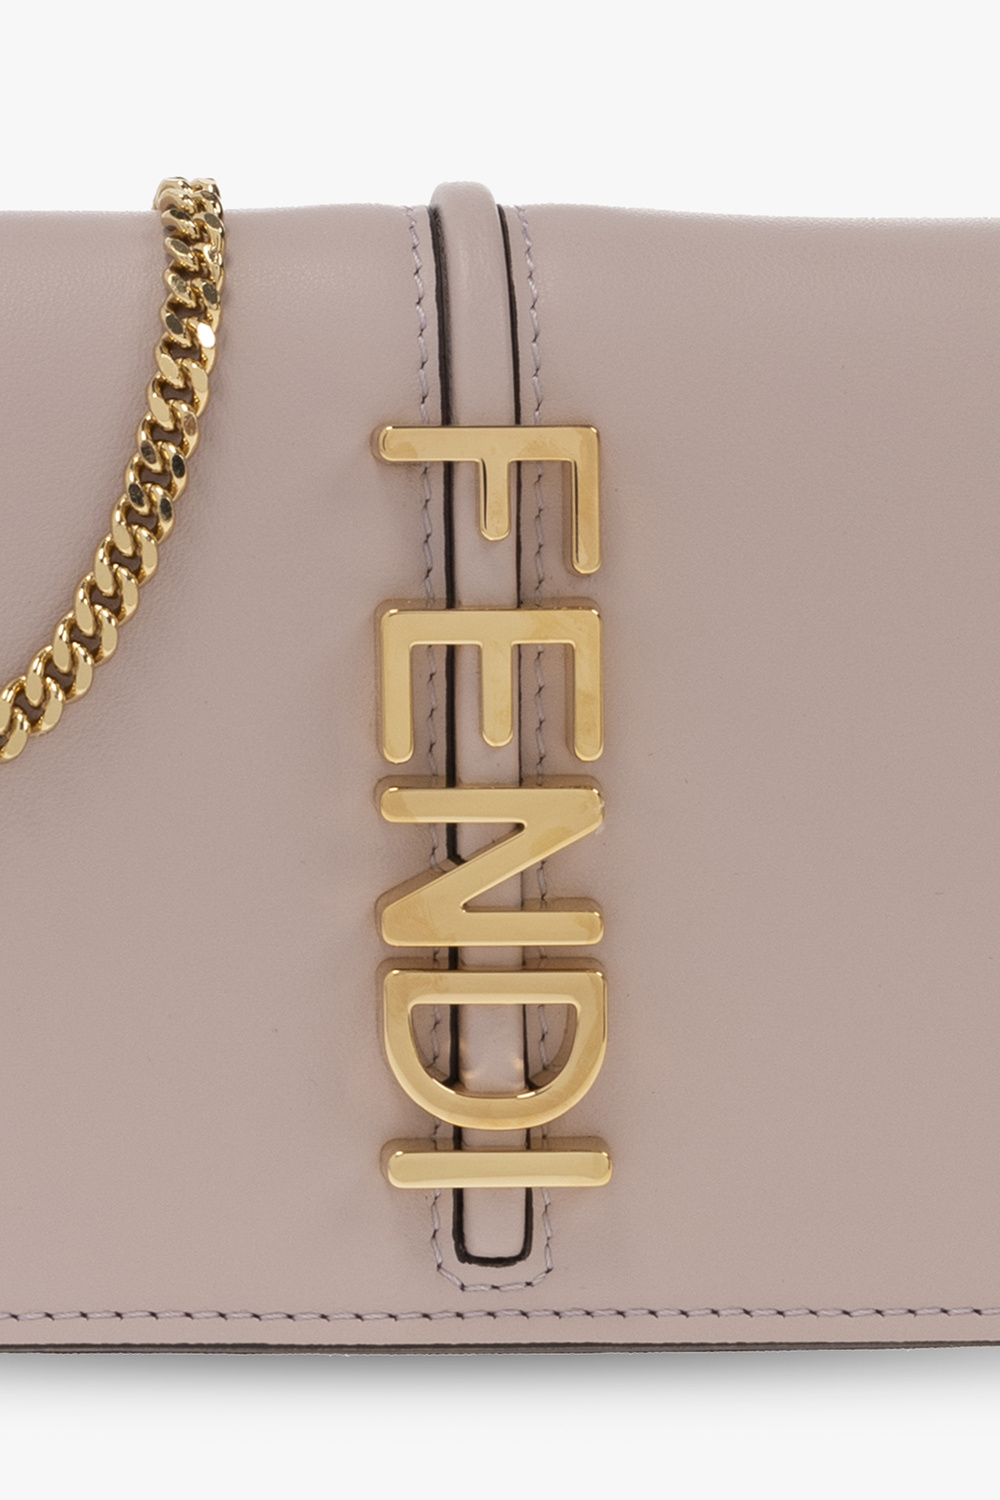 Fendi Wallet On Chain With Pouches Brown Leather Mini Bag worn by